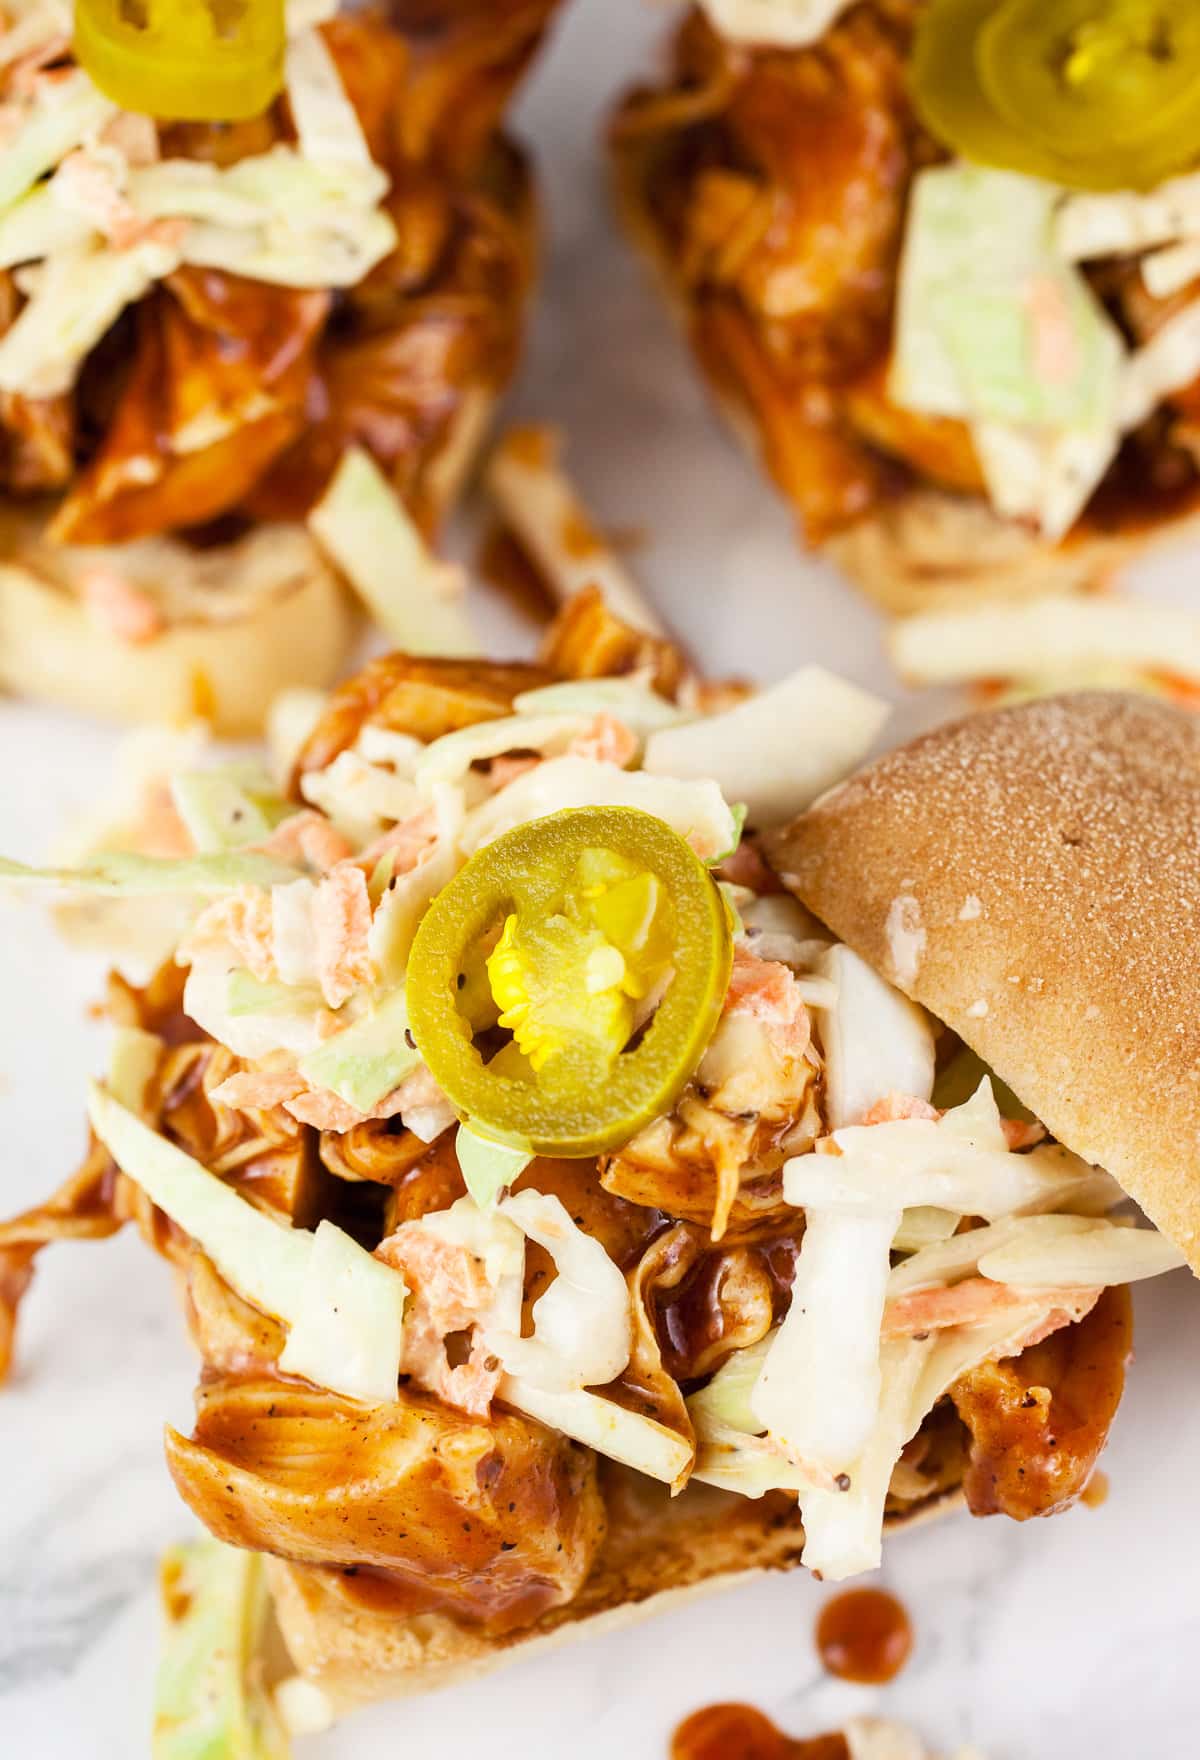 BBQ chicken sandwiches with coleslaw and pickled jalapenos.